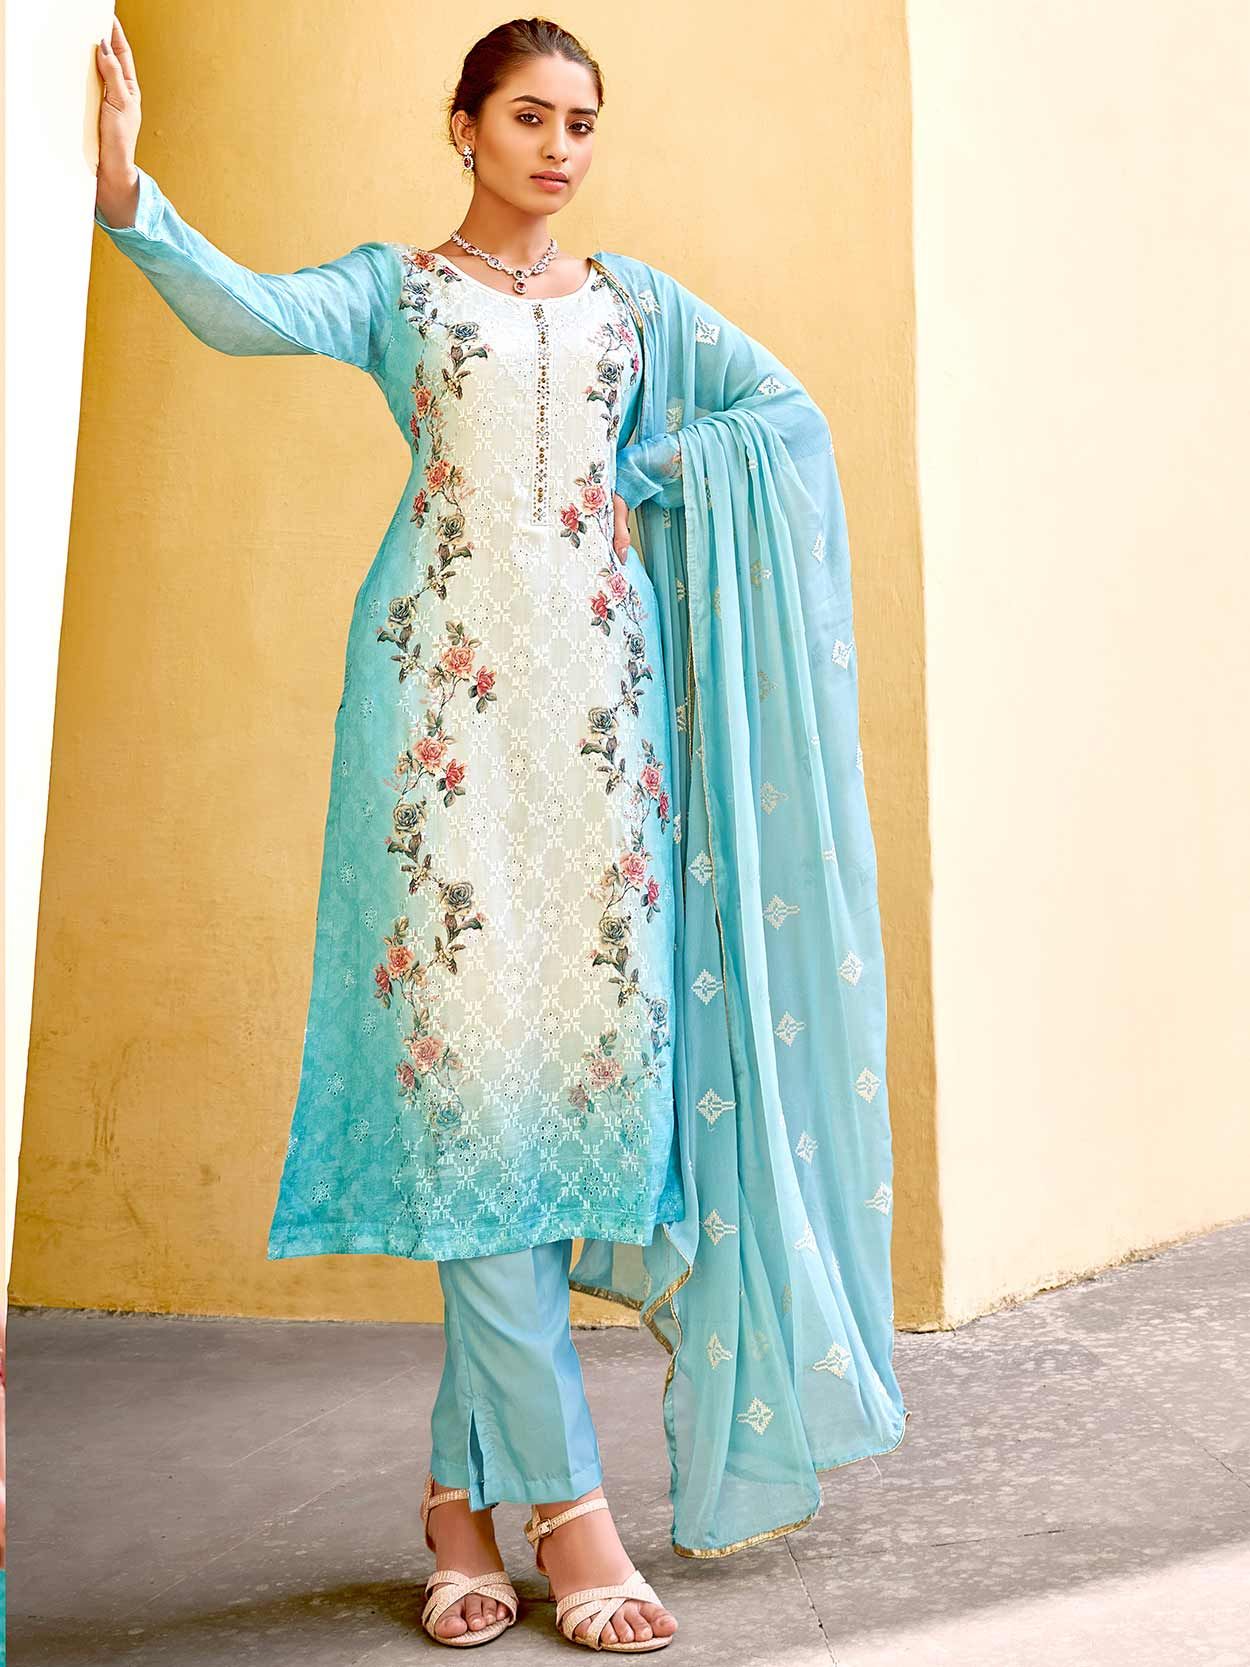 Buy Ladies Flavour Sky Blue Salwar Suit With Dupatta at Amazon.in